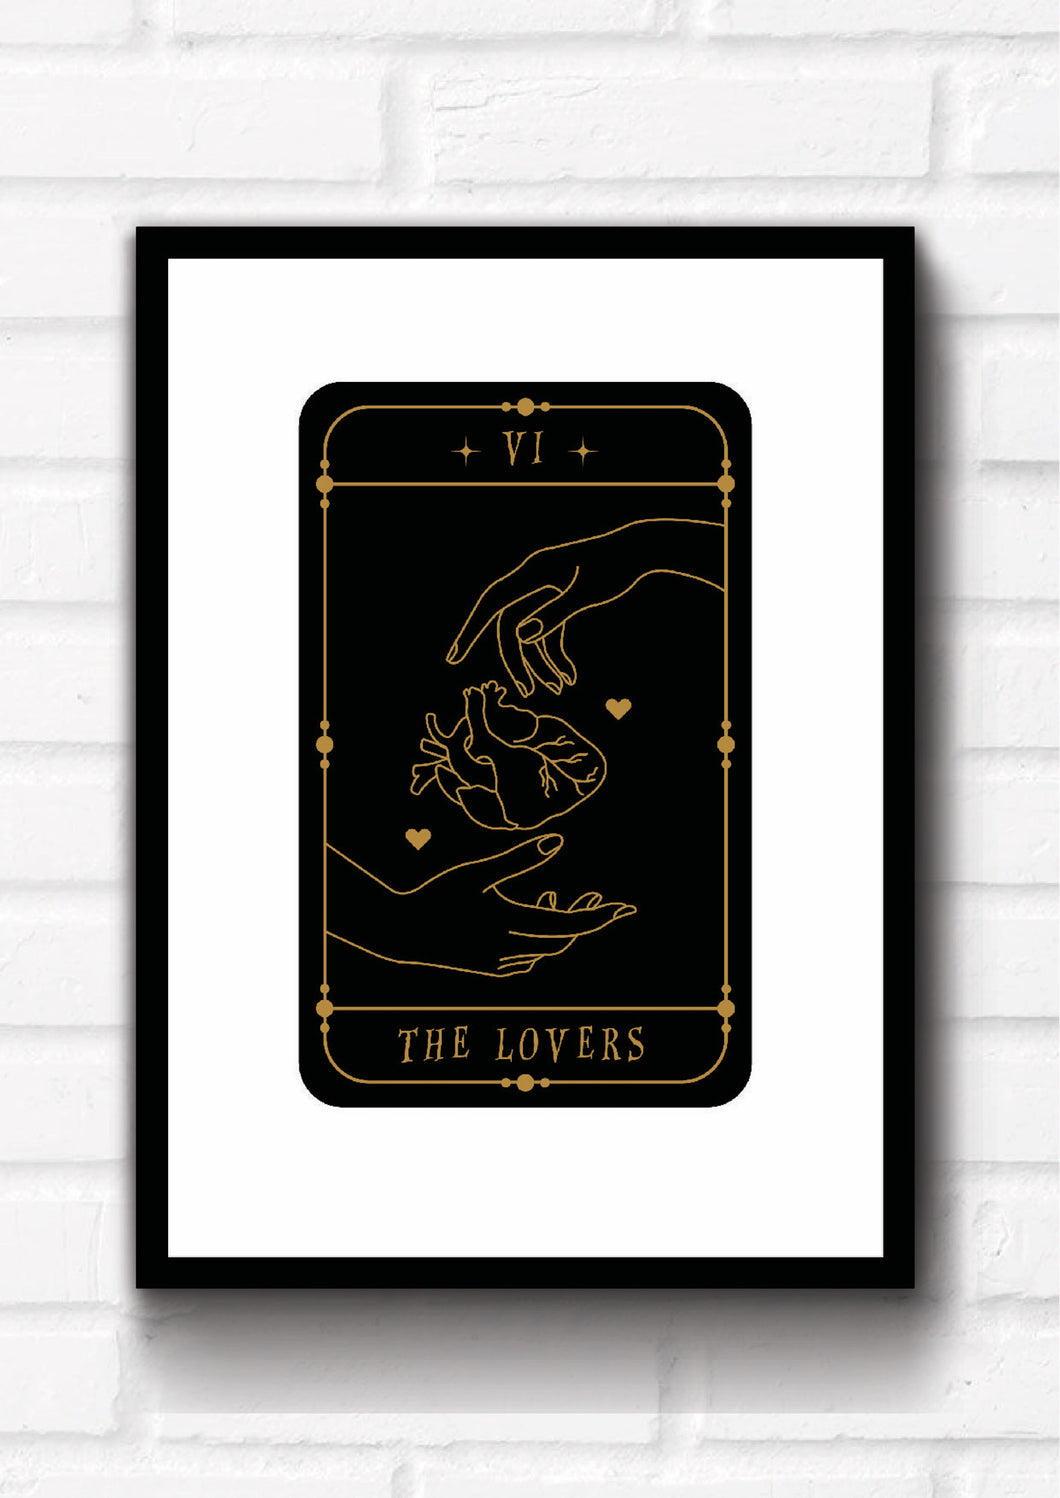 The Lovers Tarot Card. This print could fit beautifully into any room in your home. Eccentric and witchy wall art. Simply download, print and enjoy!